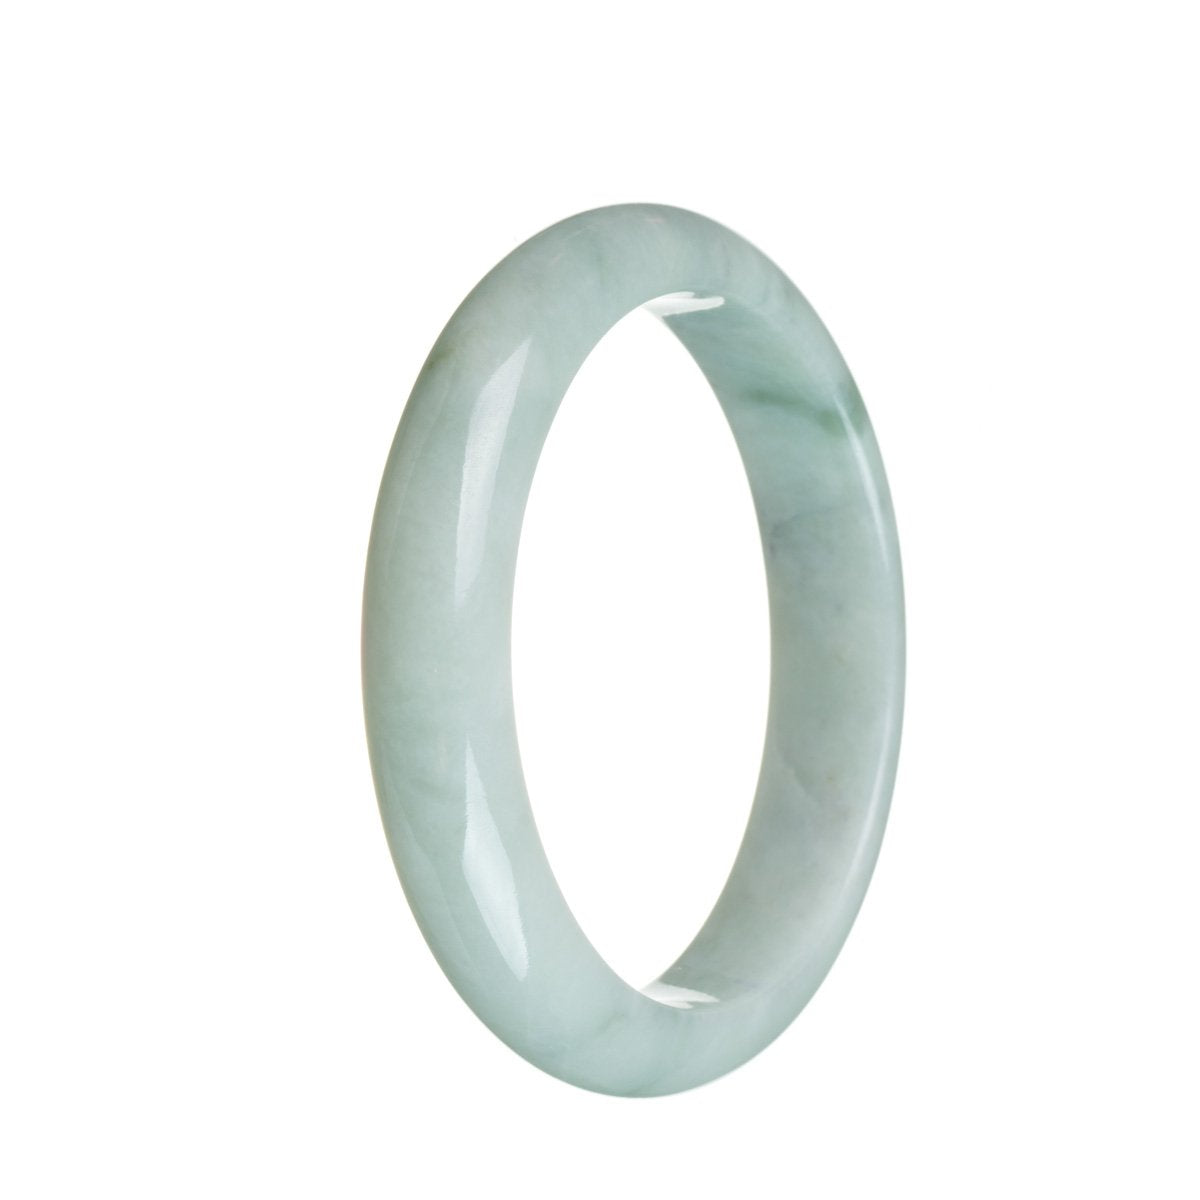 A close-up of a pale green Burmese jade bangle bracelet, showcasing its exquisite craftsmanship and half moon shape.